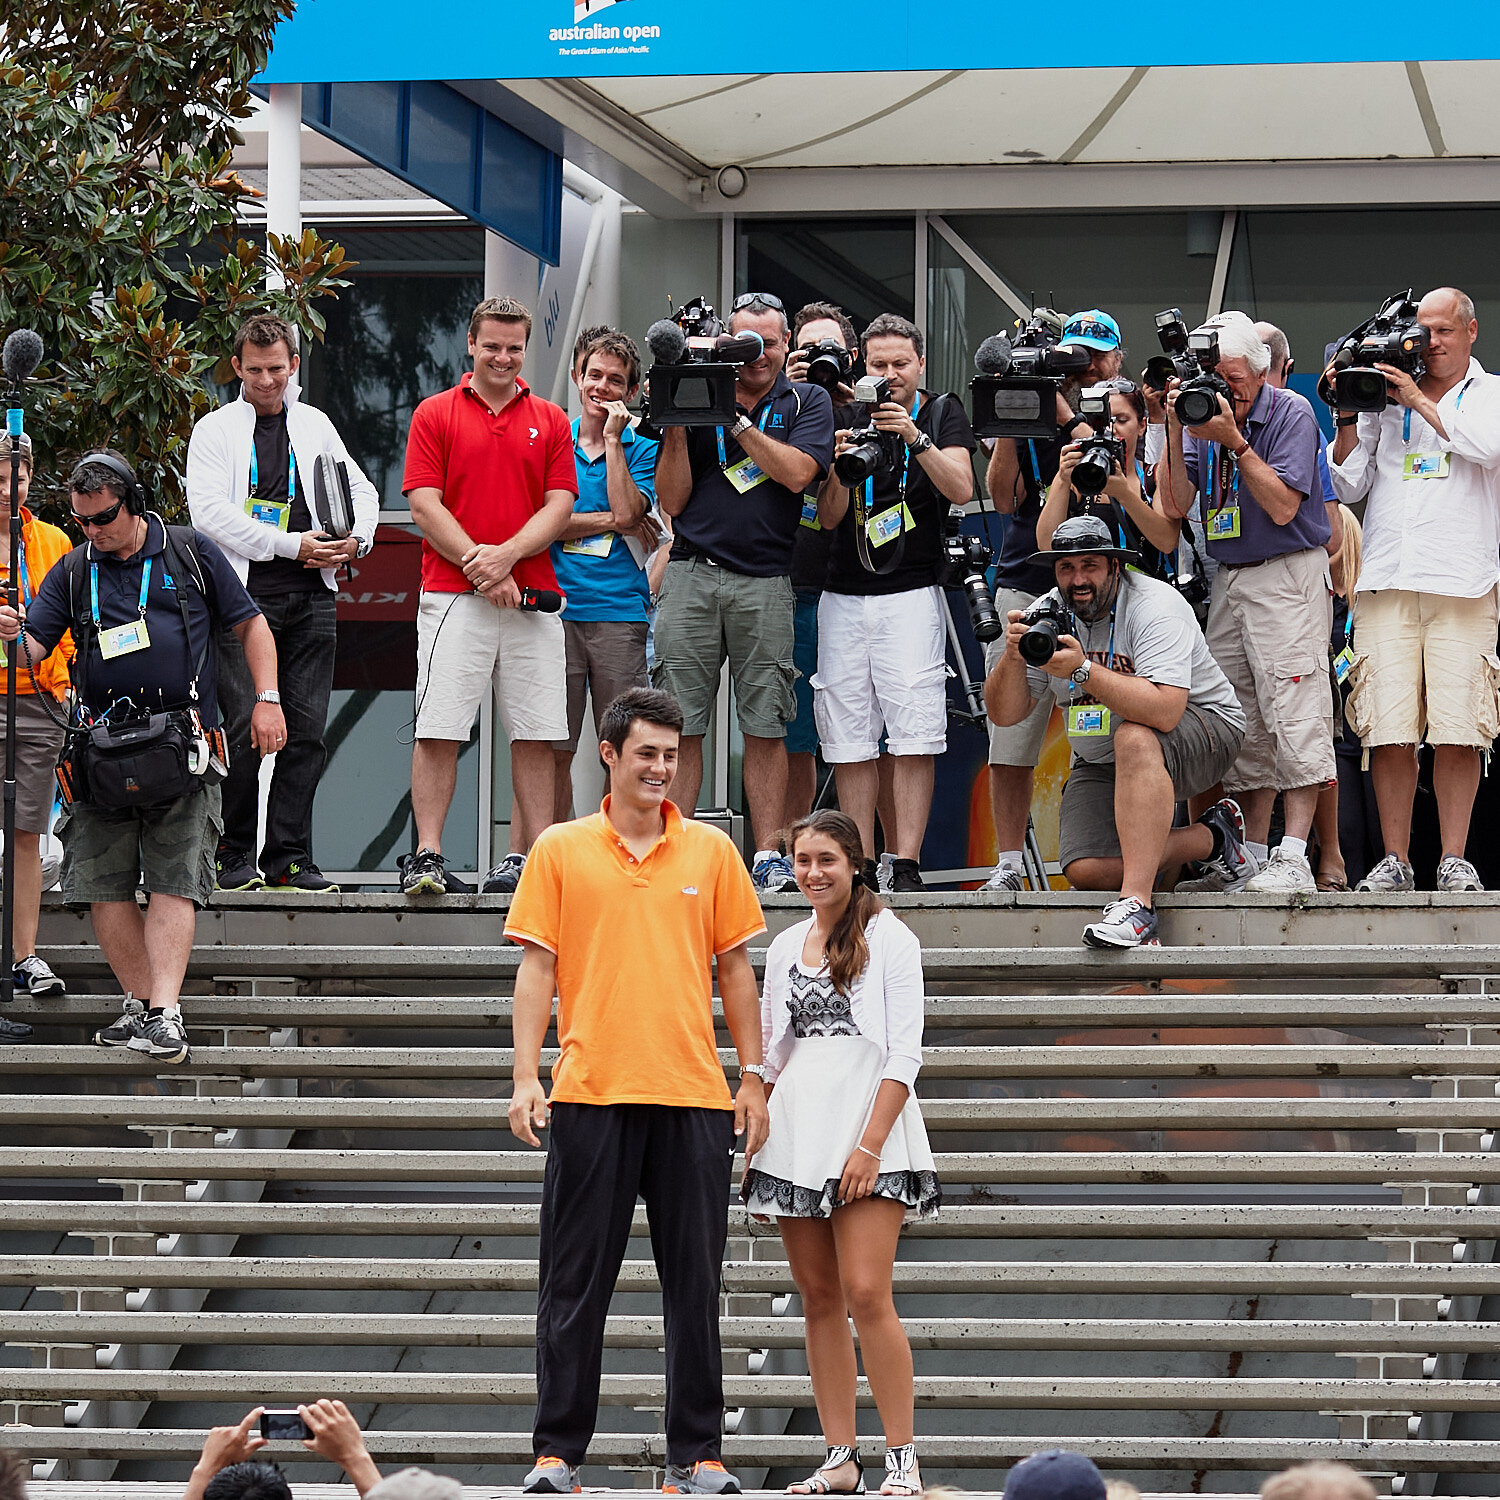 Centre of attention - Bernard and Sara Tomic 